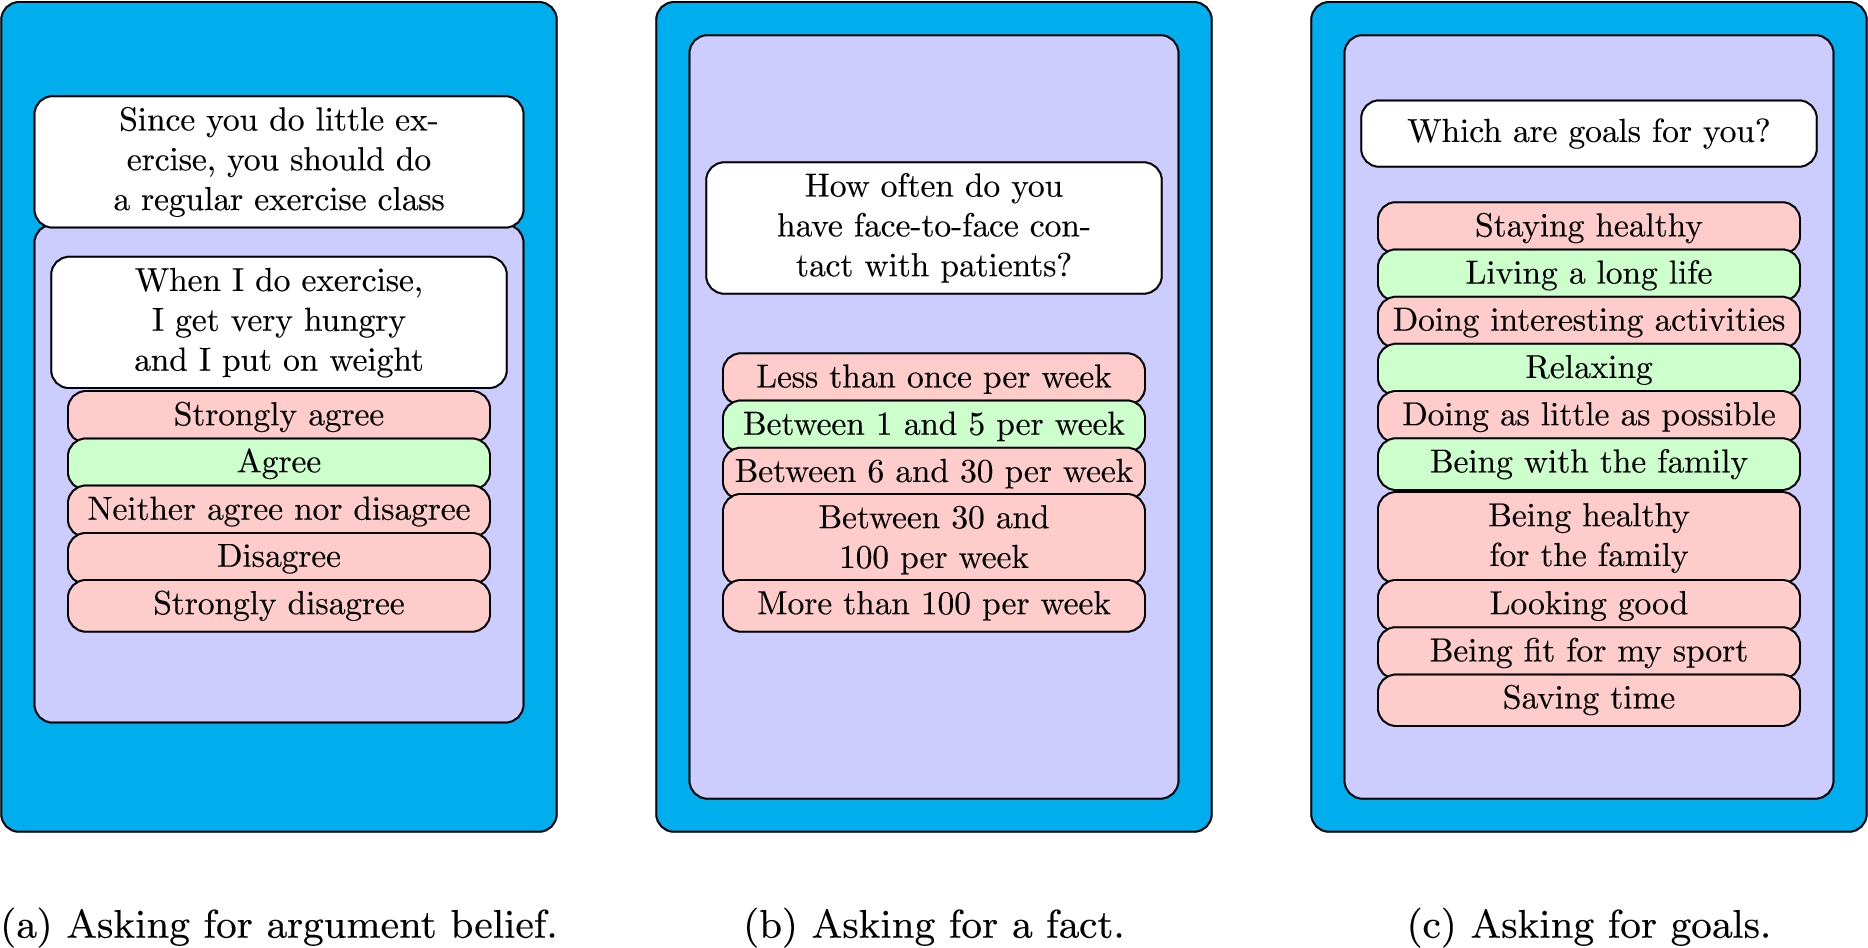 Interface for an asymmetric dialogue move for asking the user’s belief in an argument. (a) The top argument is by the APS, and the second argument is a counterargument presented by the APS. The user uses the menu to give his/her belief in the counterargument. (b) A query is asked that may be used in a user model and menu of answers is provided. (c) A query is asked by the system to determine the goals of the user. Here the user may select any number of the items on the list.